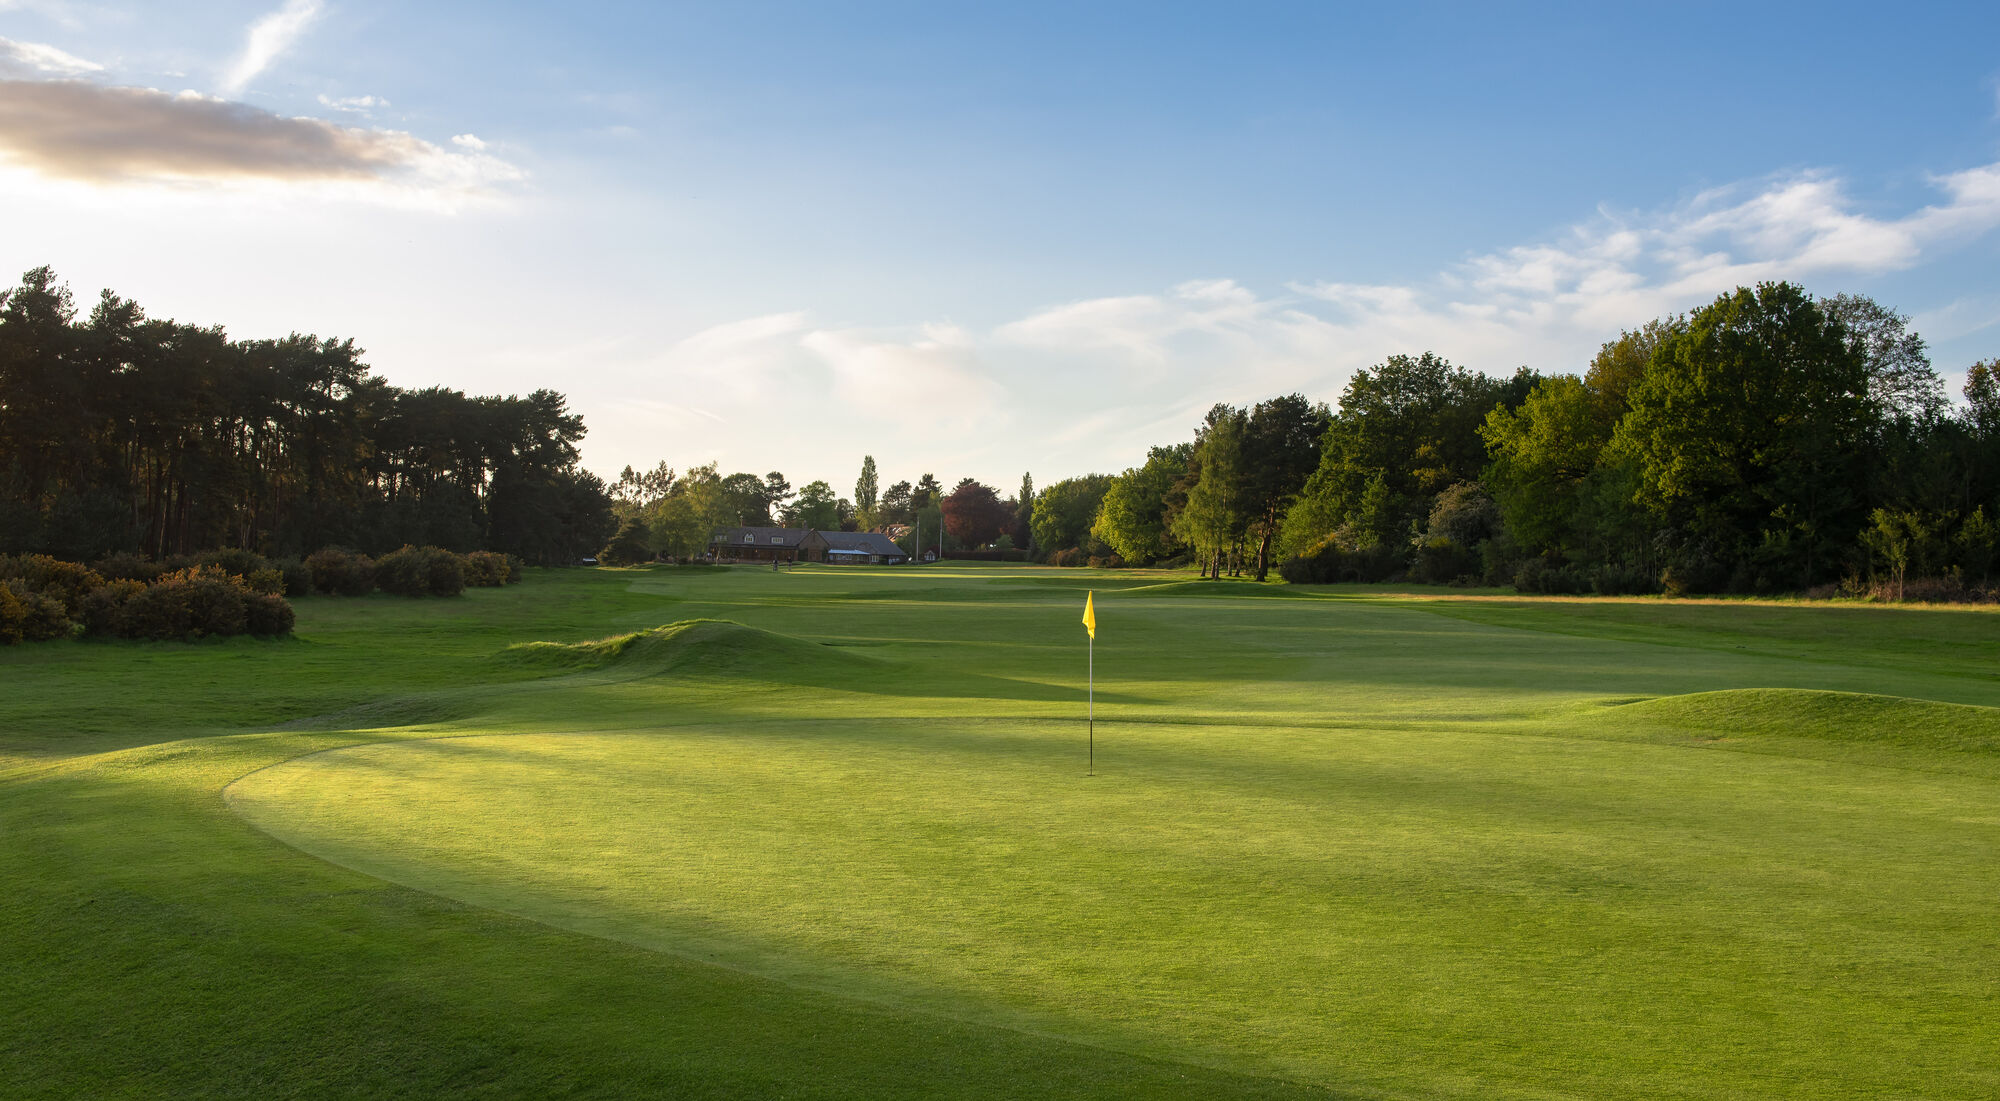 R&A Open Qualifying Venue ranked in the English Top 100 Courses